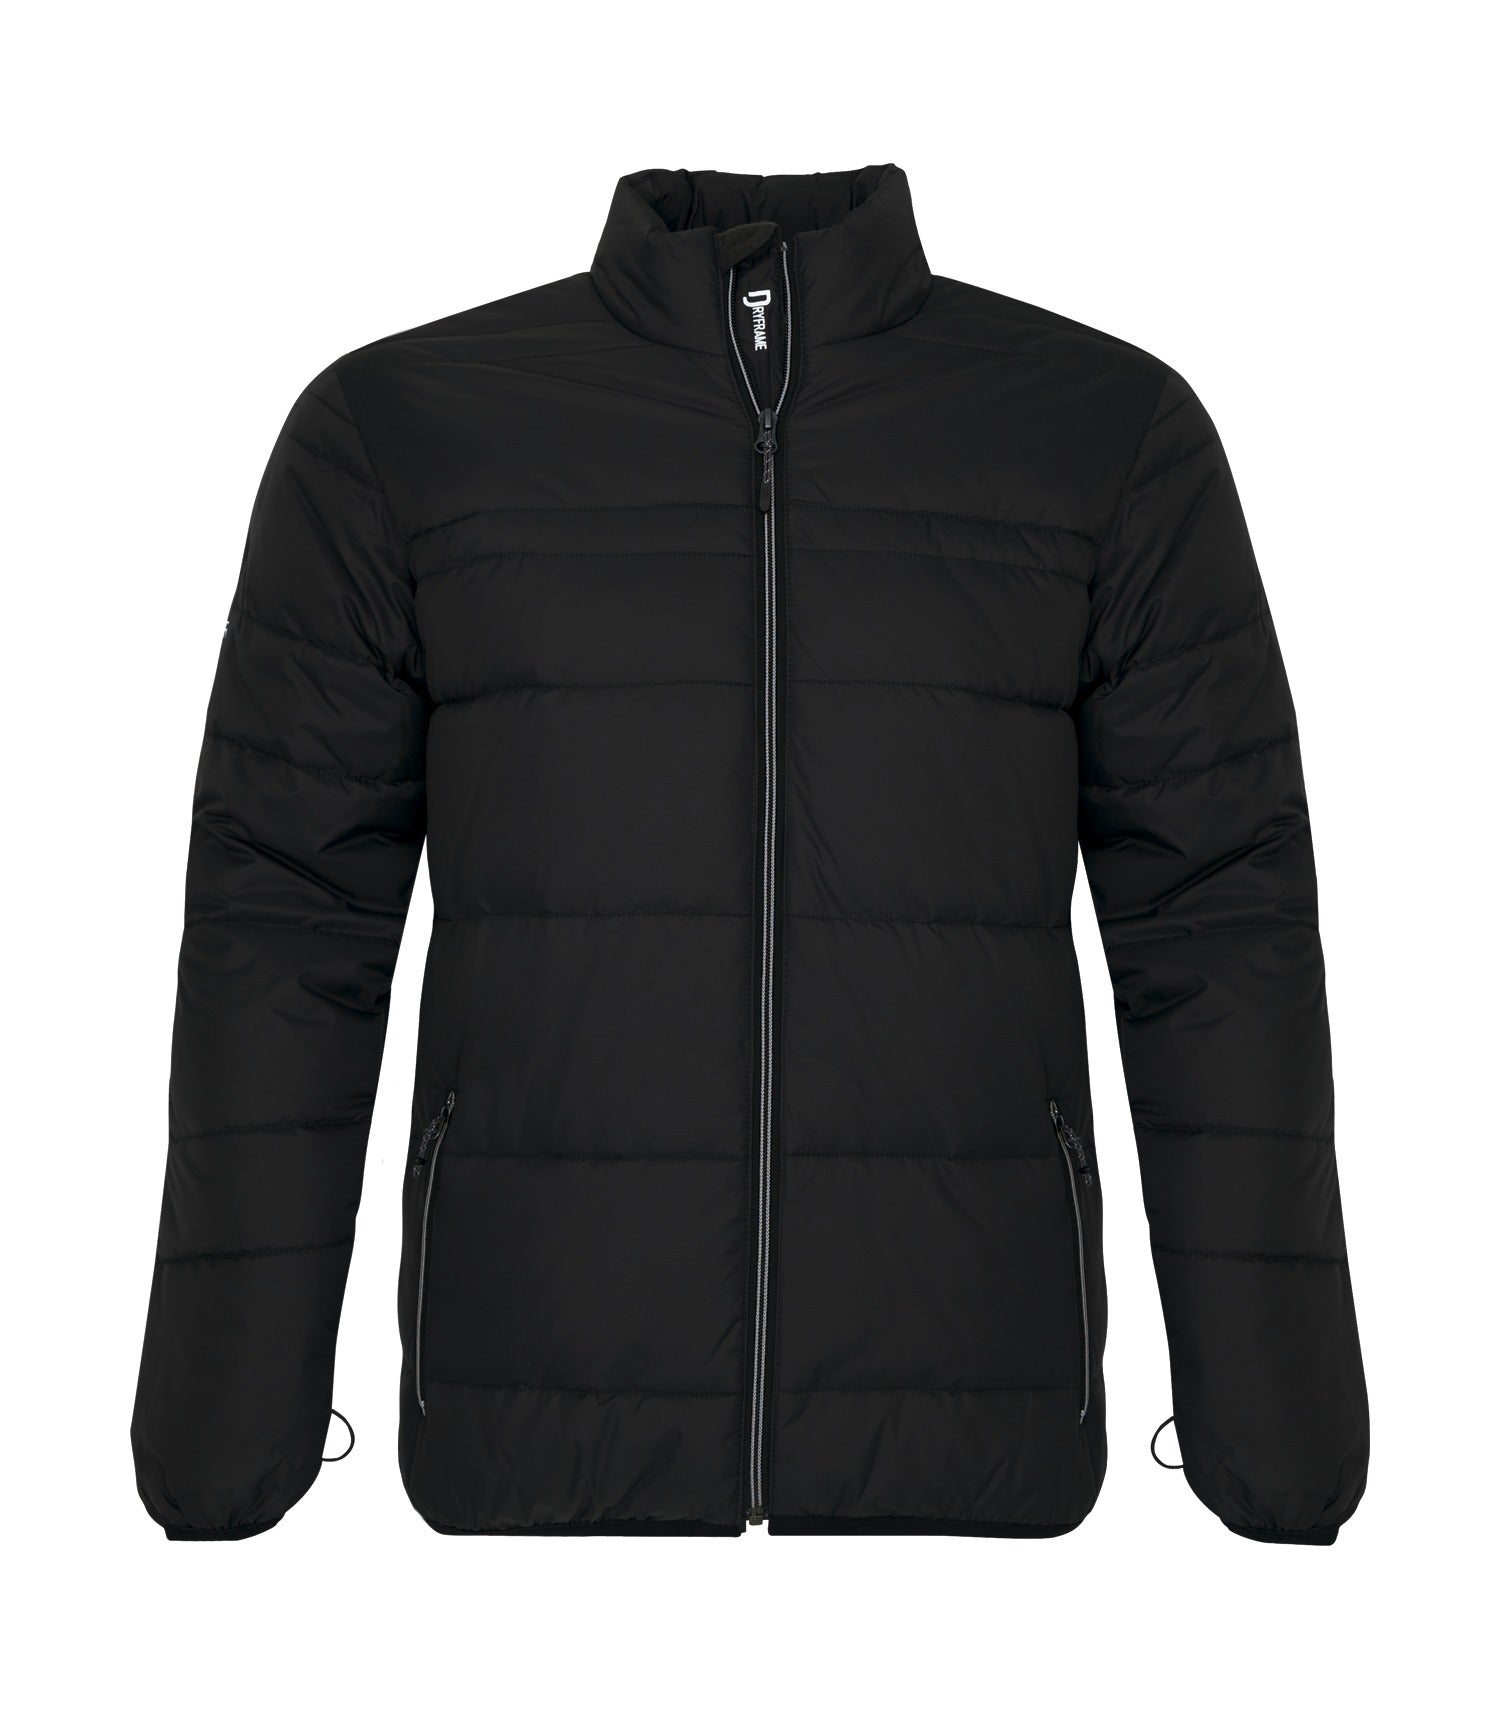 DRYFRAME® DRY TECH INSULATED SYSTEM JACKET. DF7635